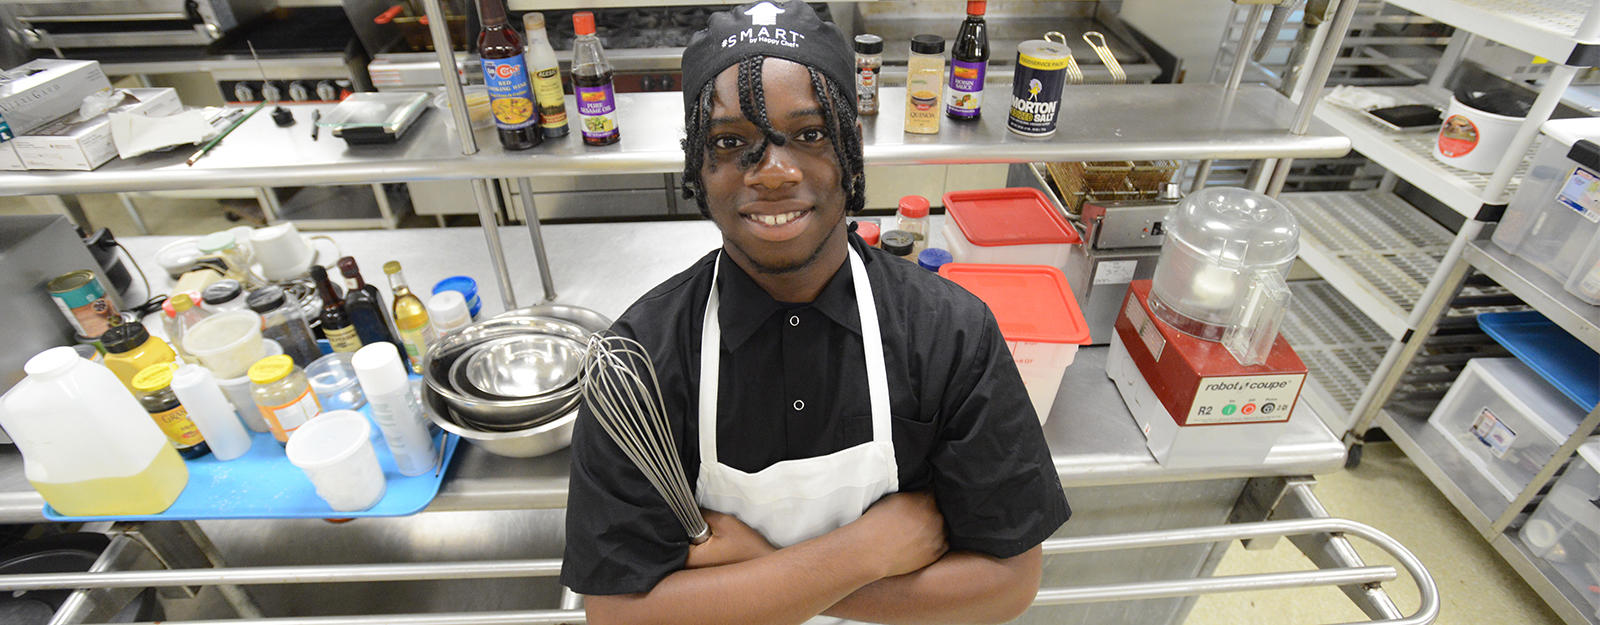 Culinary student posing for a photo in the kitchen.